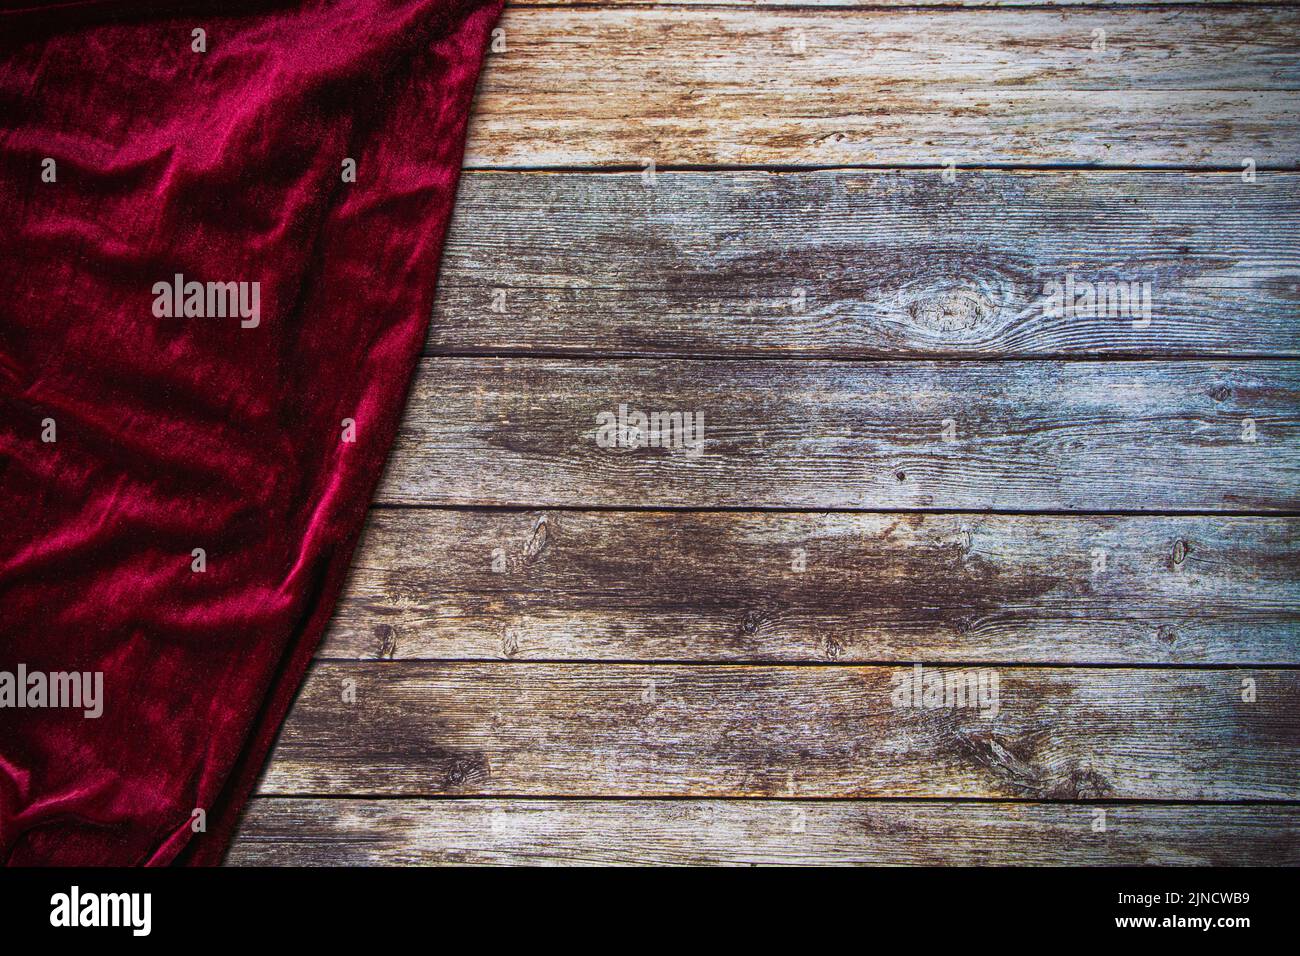 Red fabric velvet table cloth on empty wooden table background with copy space. Stock Photo